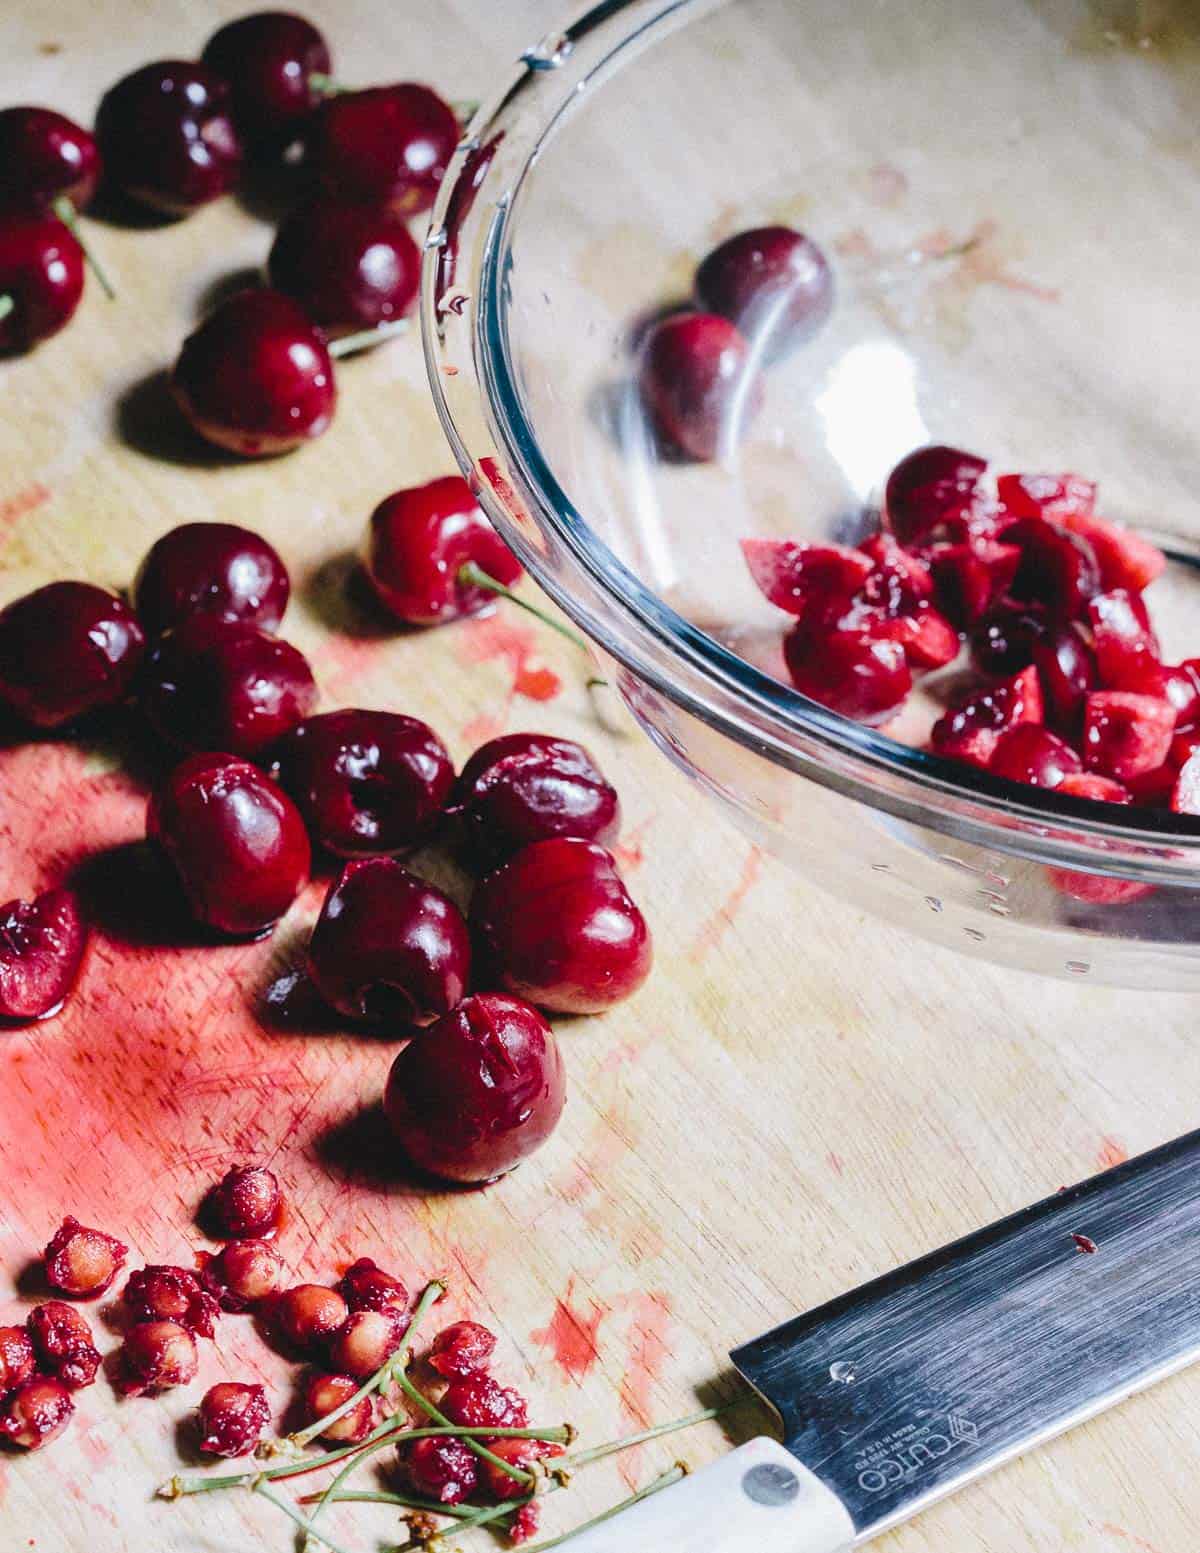 Cherries for Blackened Shrimp Tacos with Grilled Corn Cherry Salsa